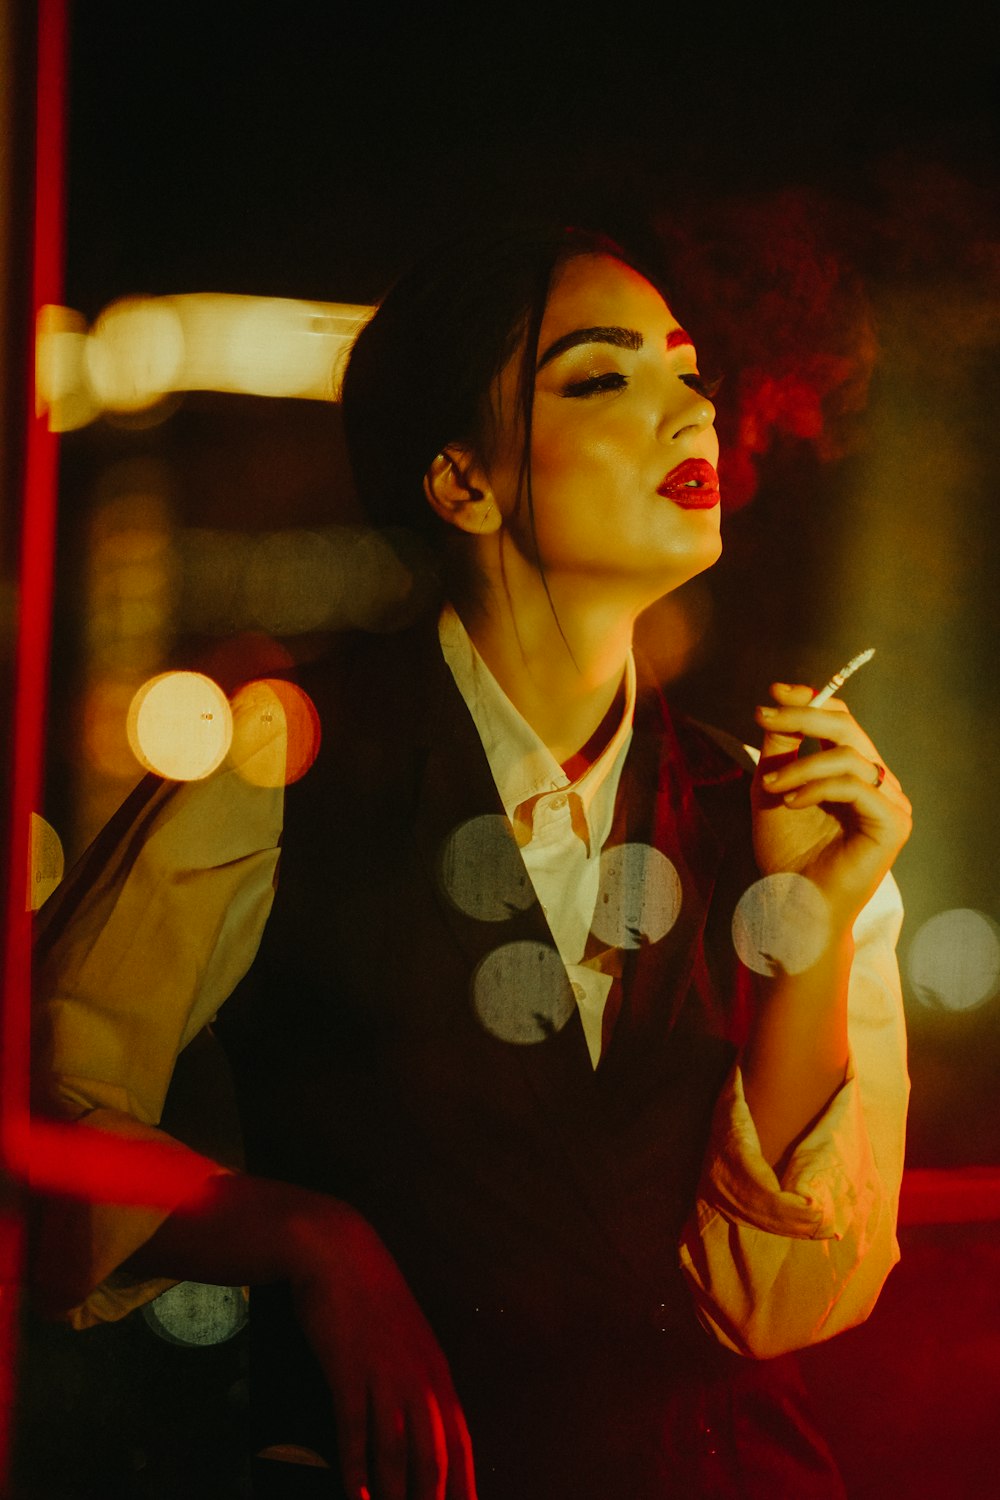 a woman smoking a cigarette in the dark